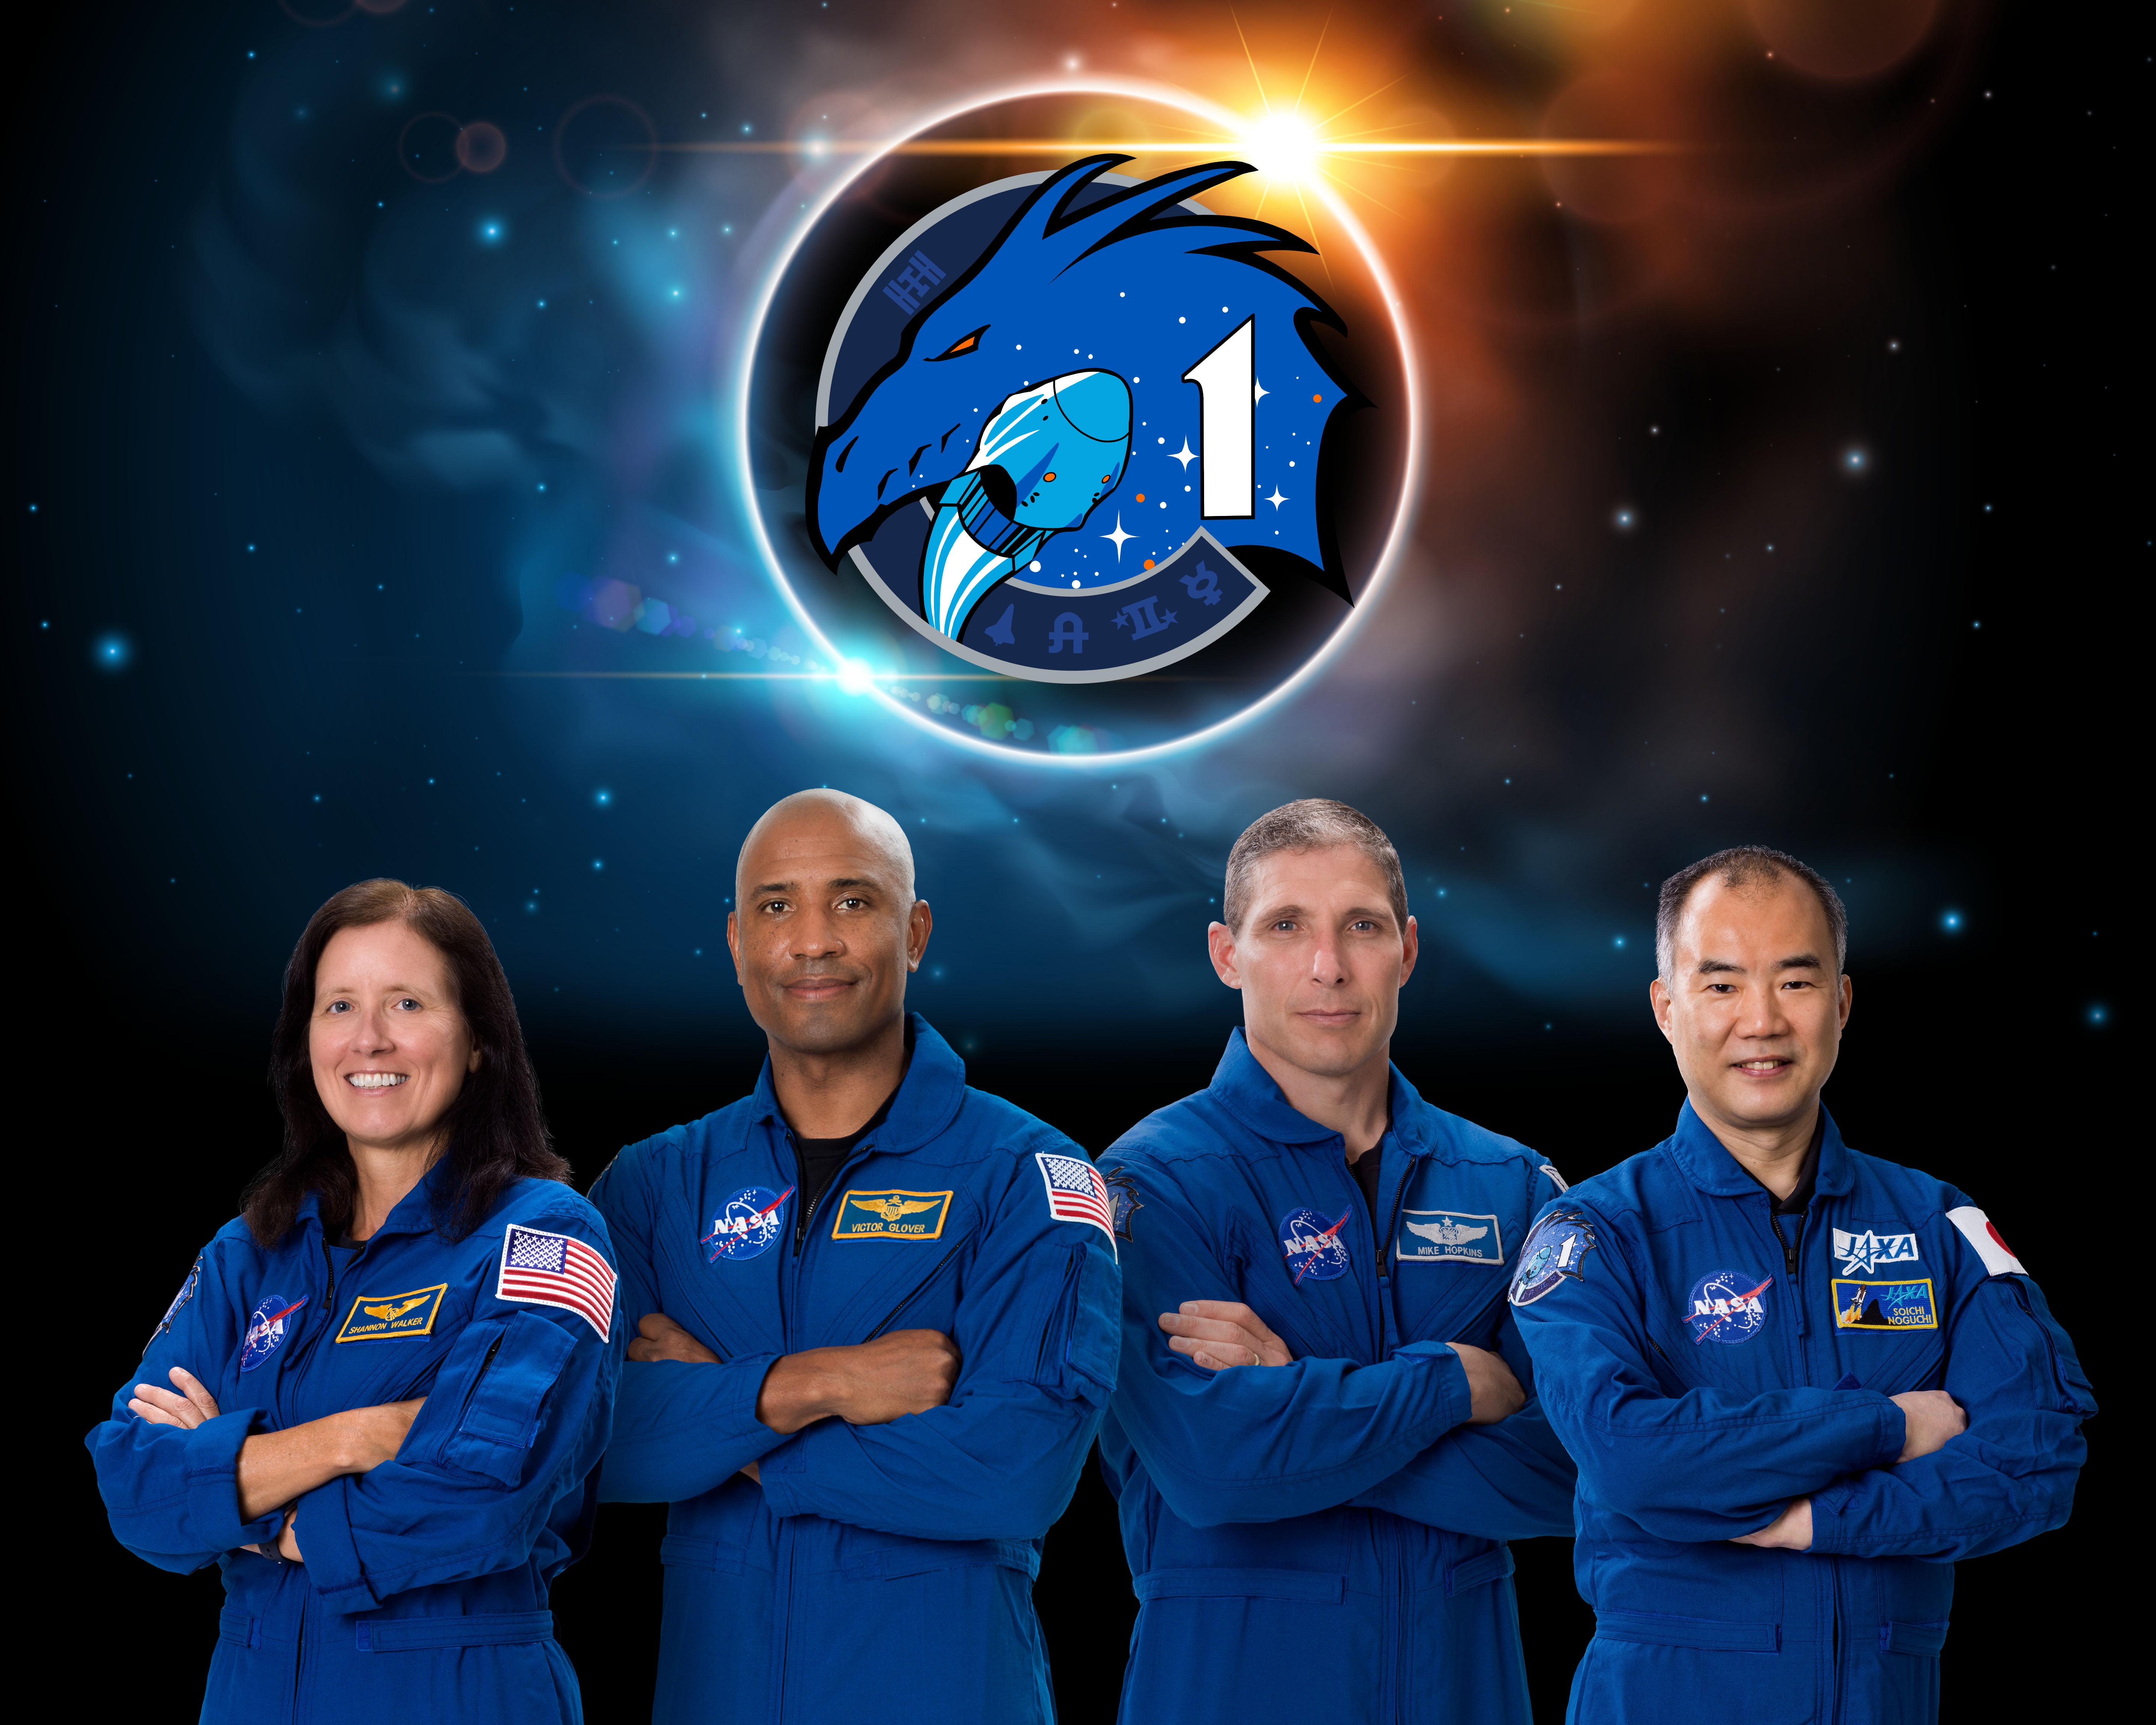 A group photo of NASA's SpaceX Crew-1 crew members.